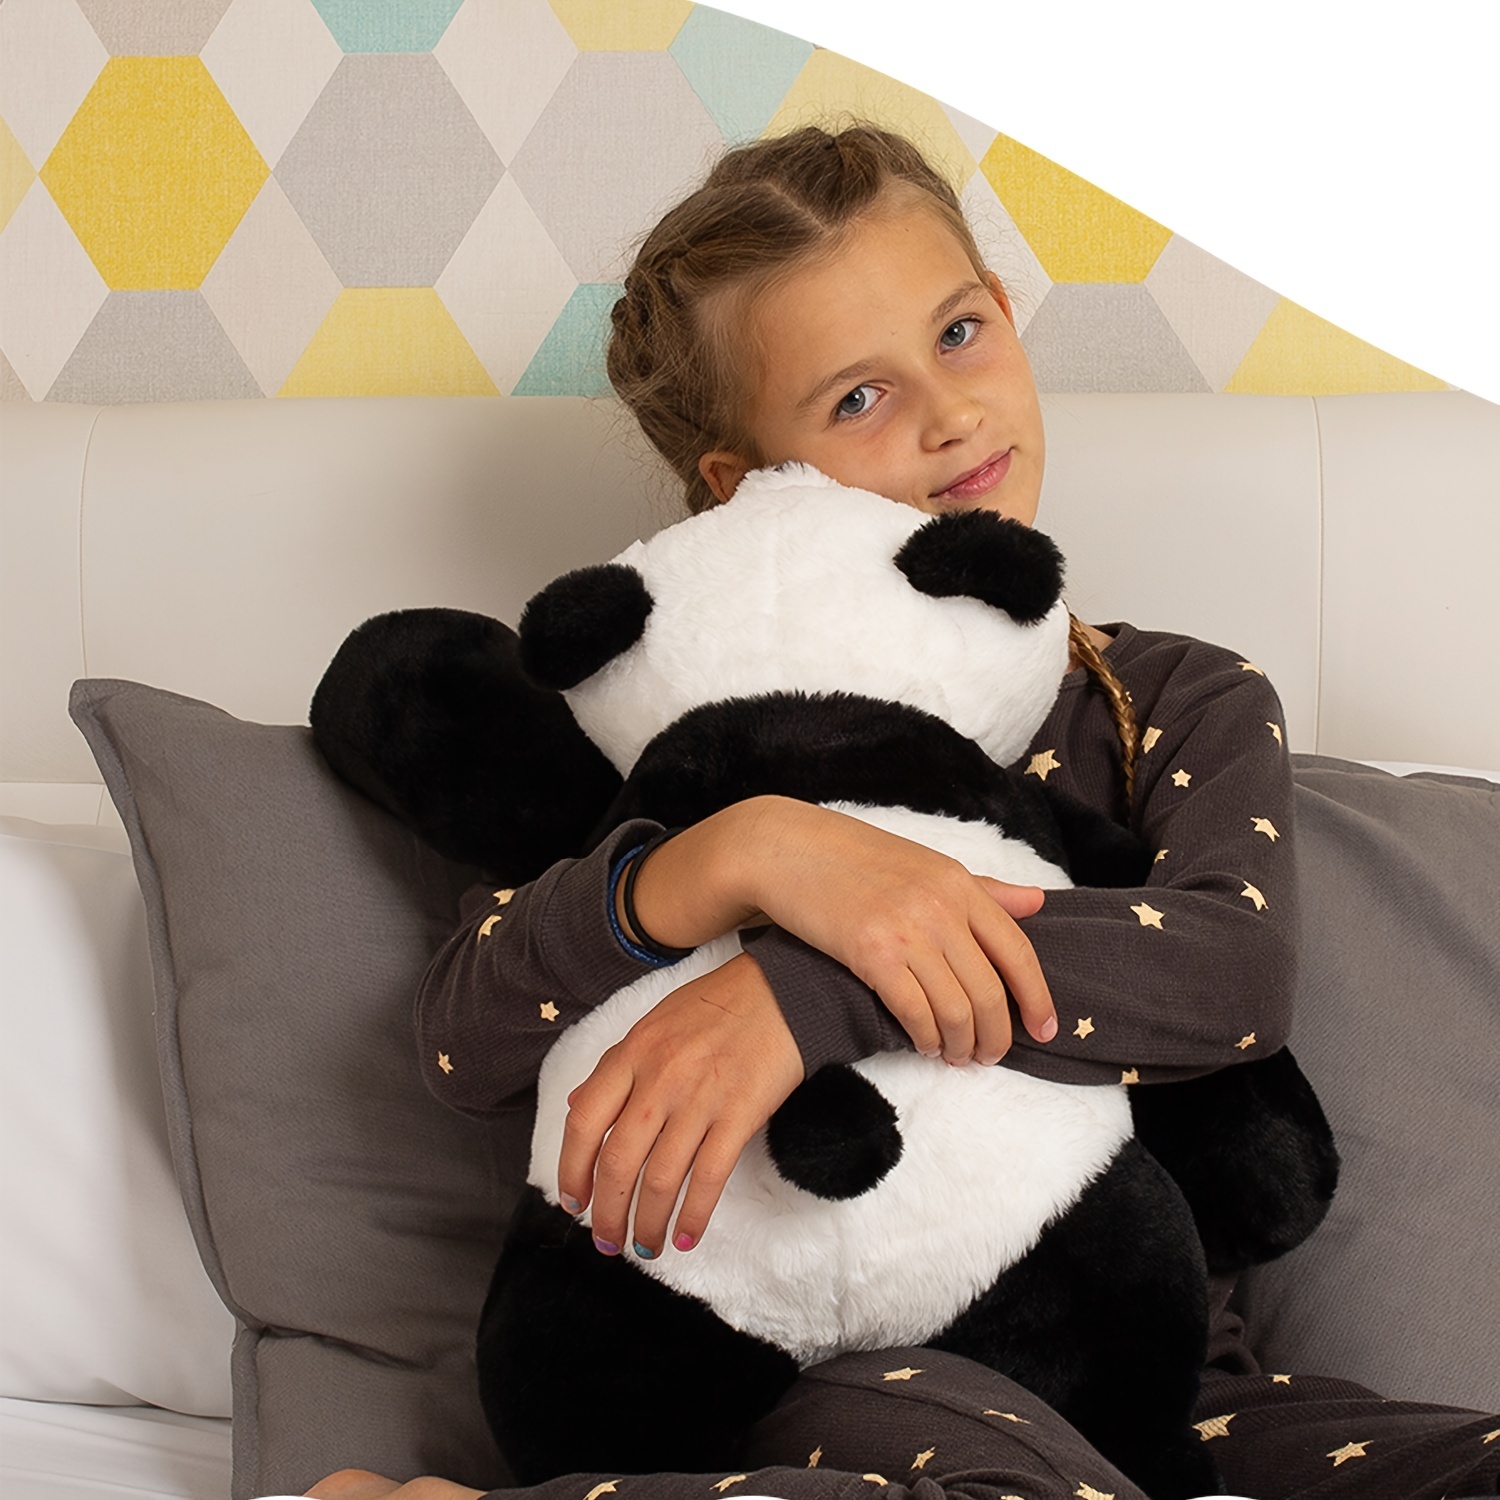 7 weighted stuffed animals adults and kids can use